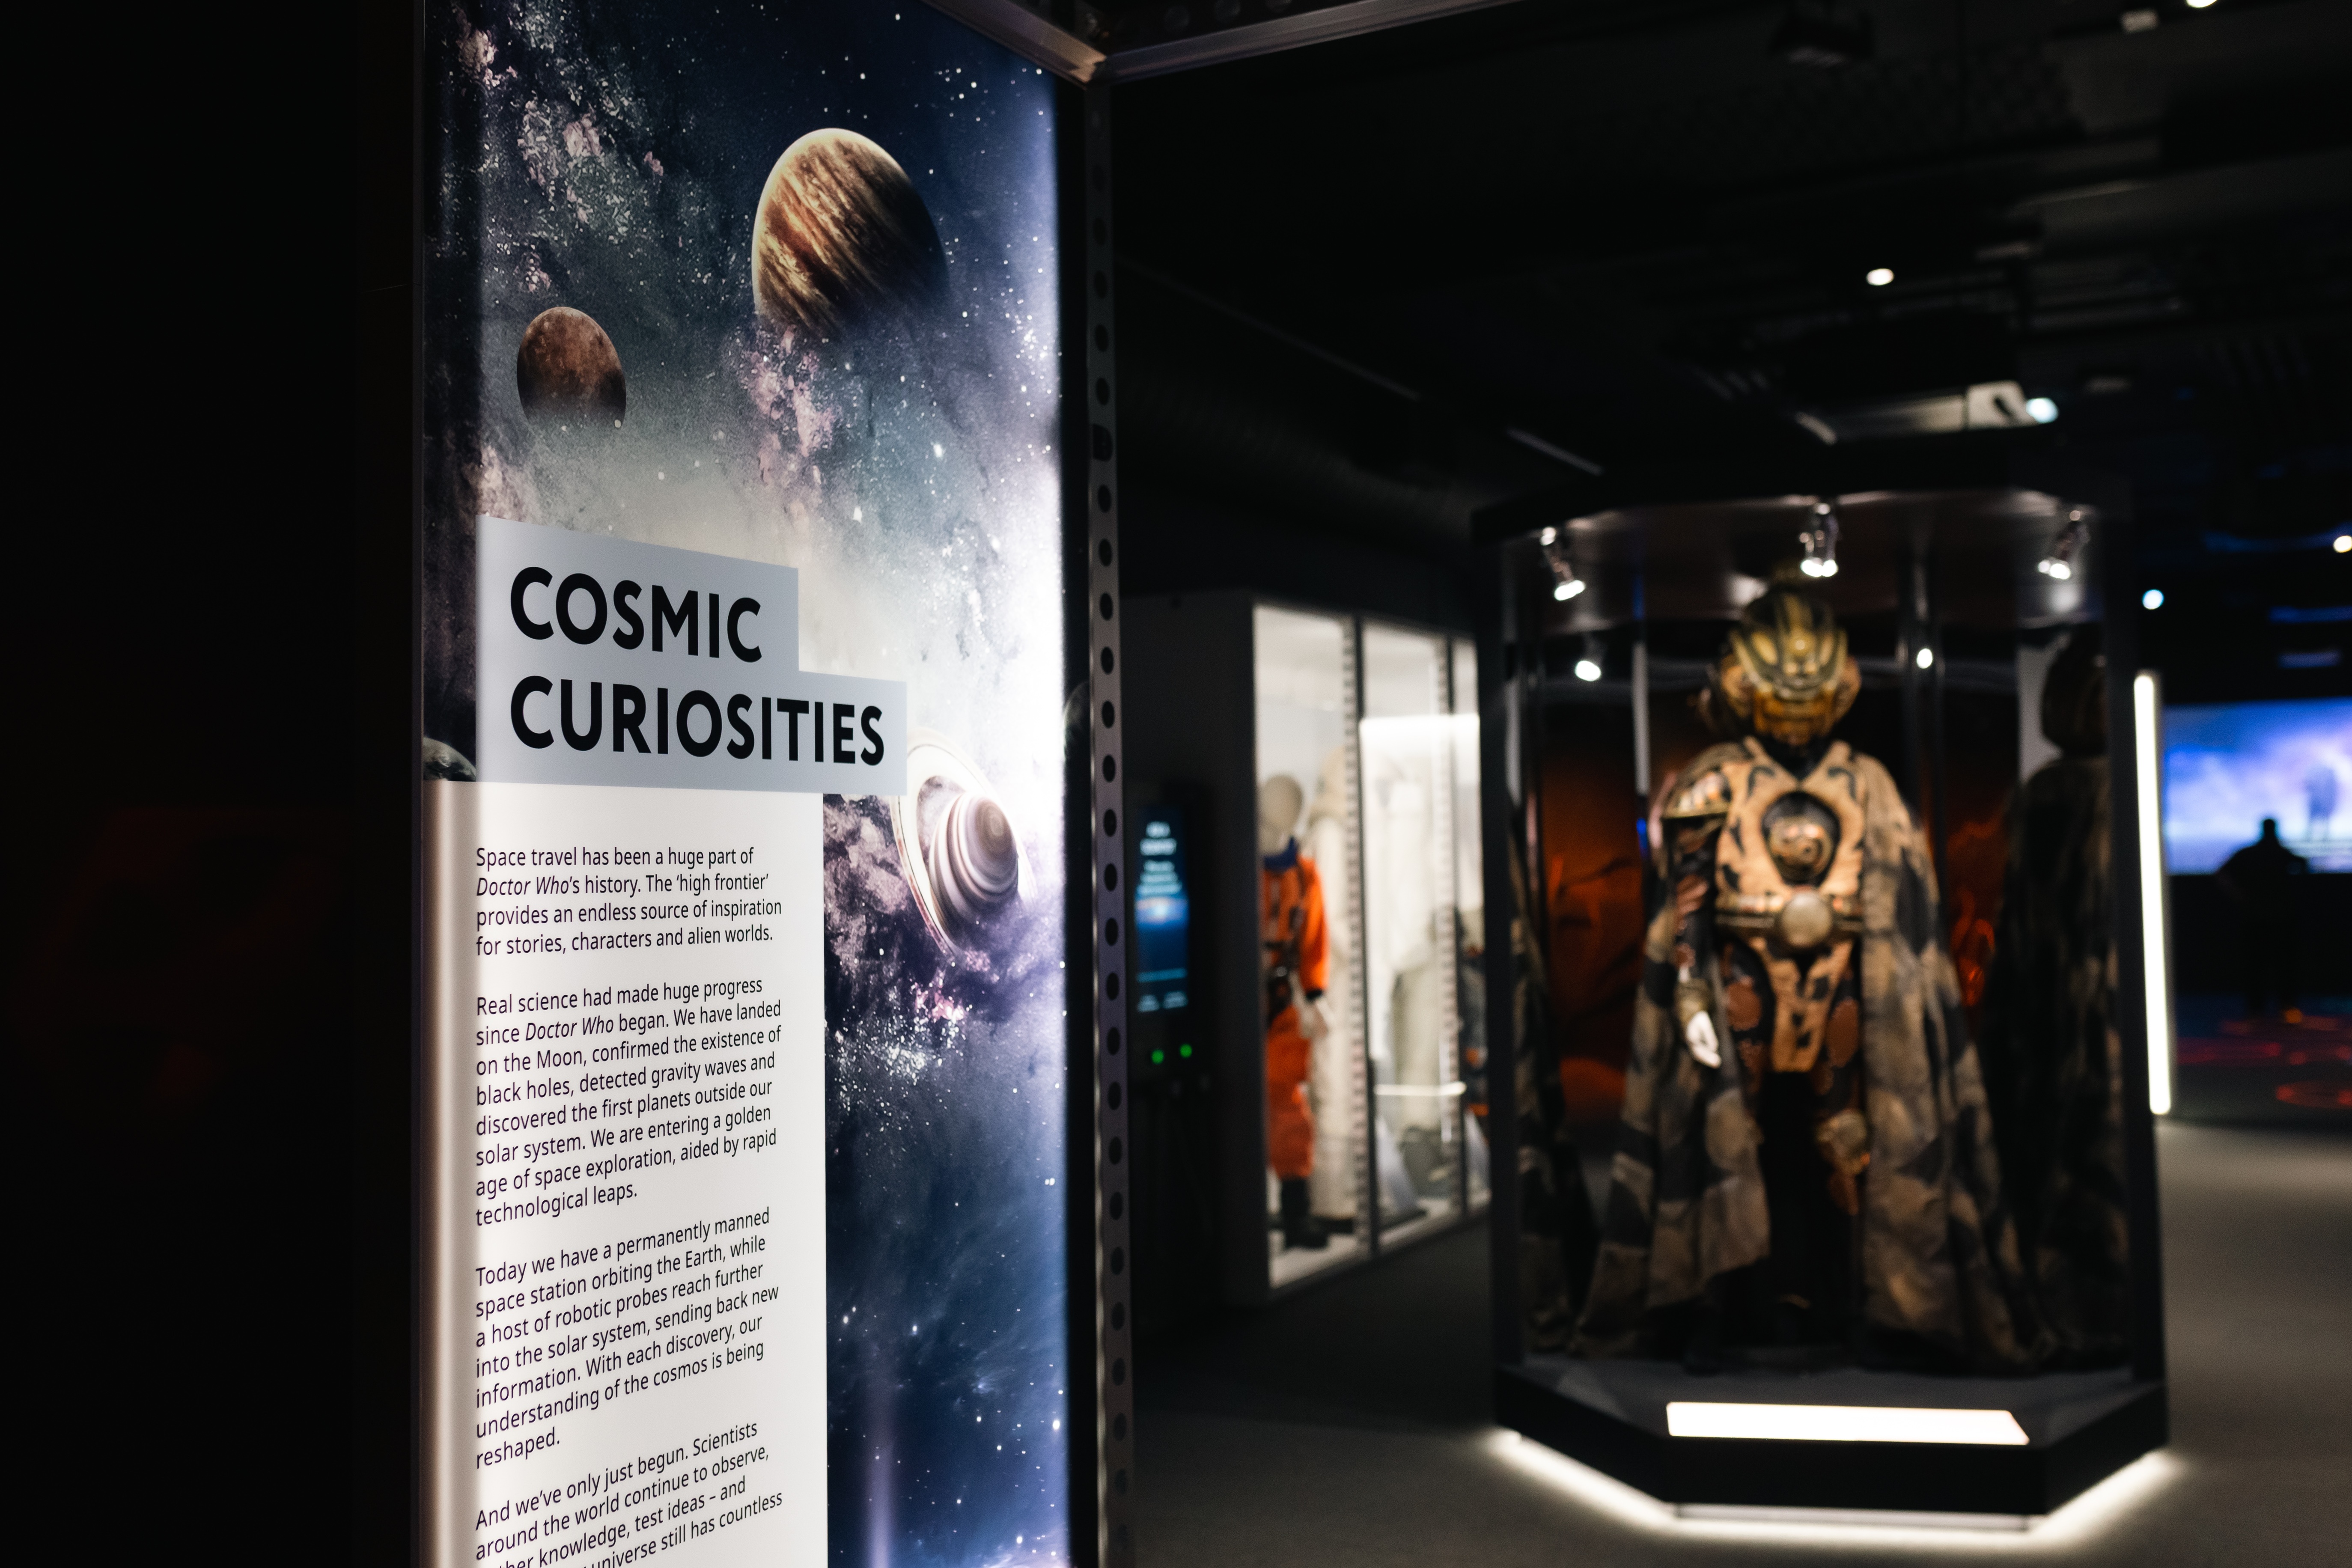 Cosmic Curiosities looks to the stars: here visitors learn more about deep space exploration, black holes, and the latest thinking on big questions challenging astroscientists today.